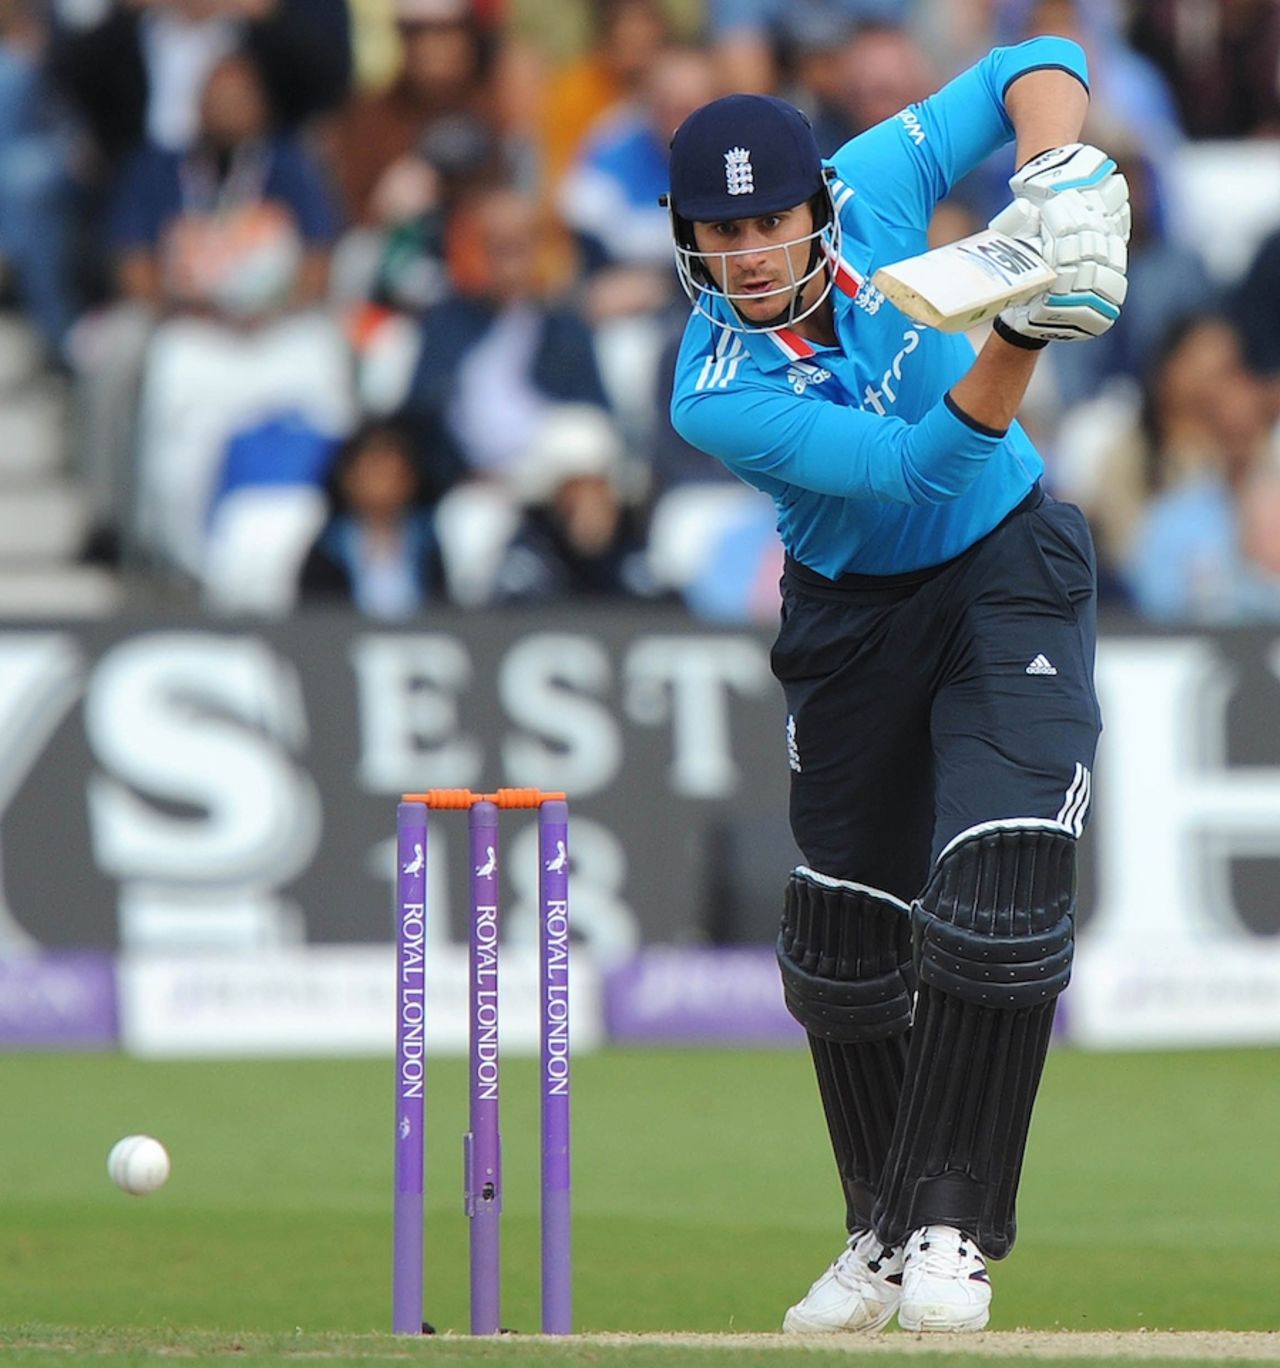 Alex Hales played a couple of pleasing drives through off, England v India, 3rd ODI, Trent Bridge, August 30, 2014